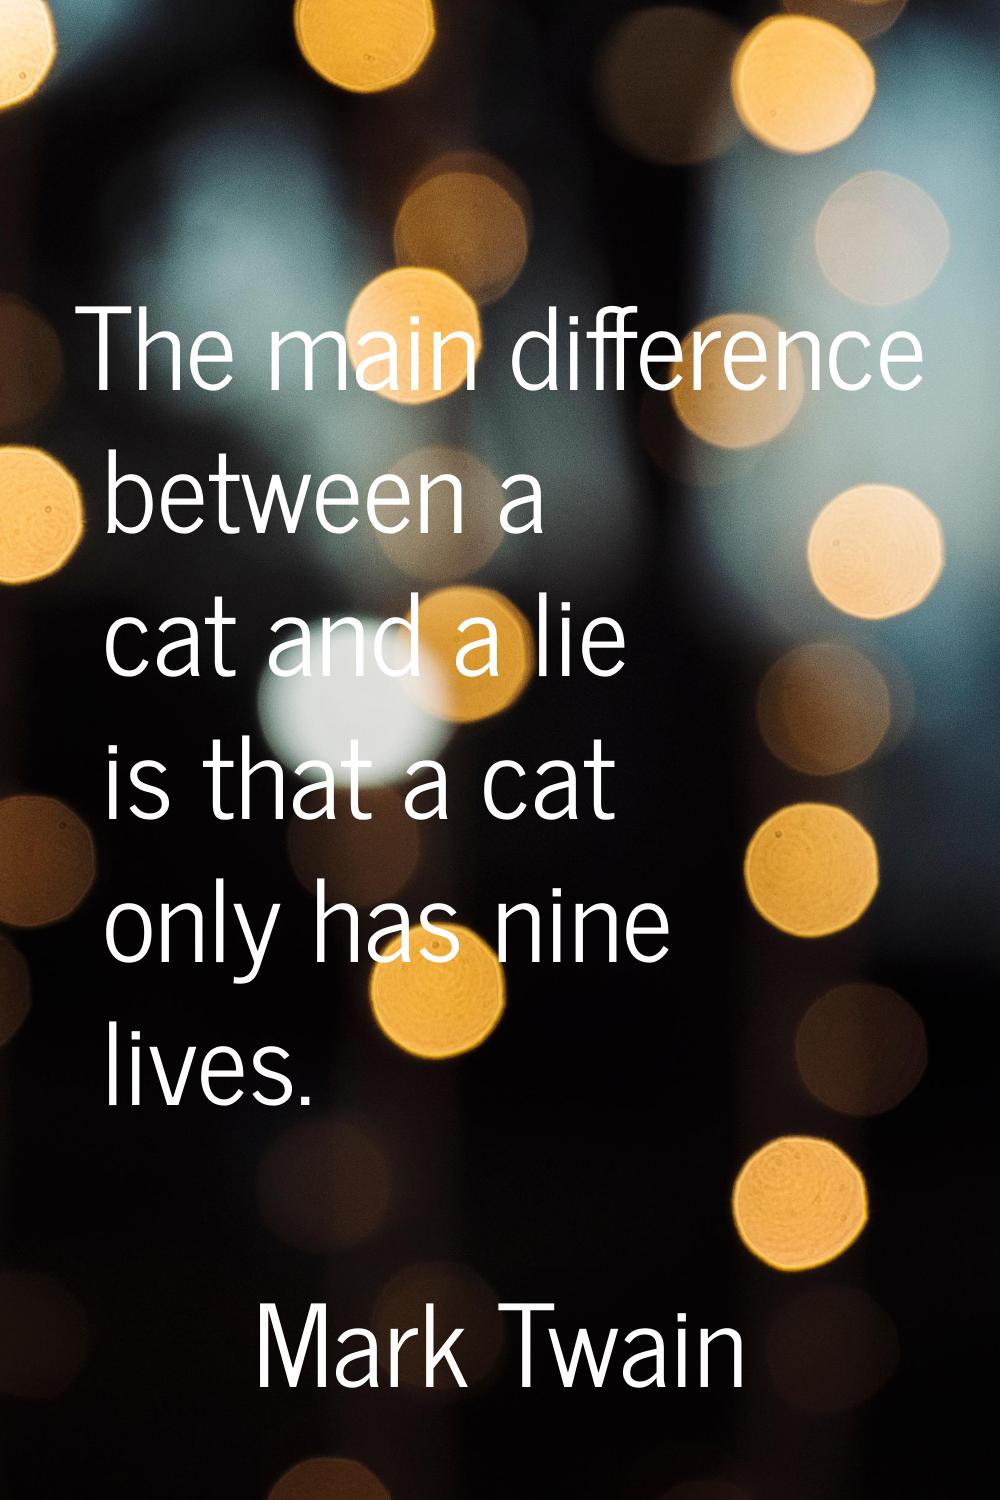 The main difference between a cat and a lie is that a cat only has nine lives.